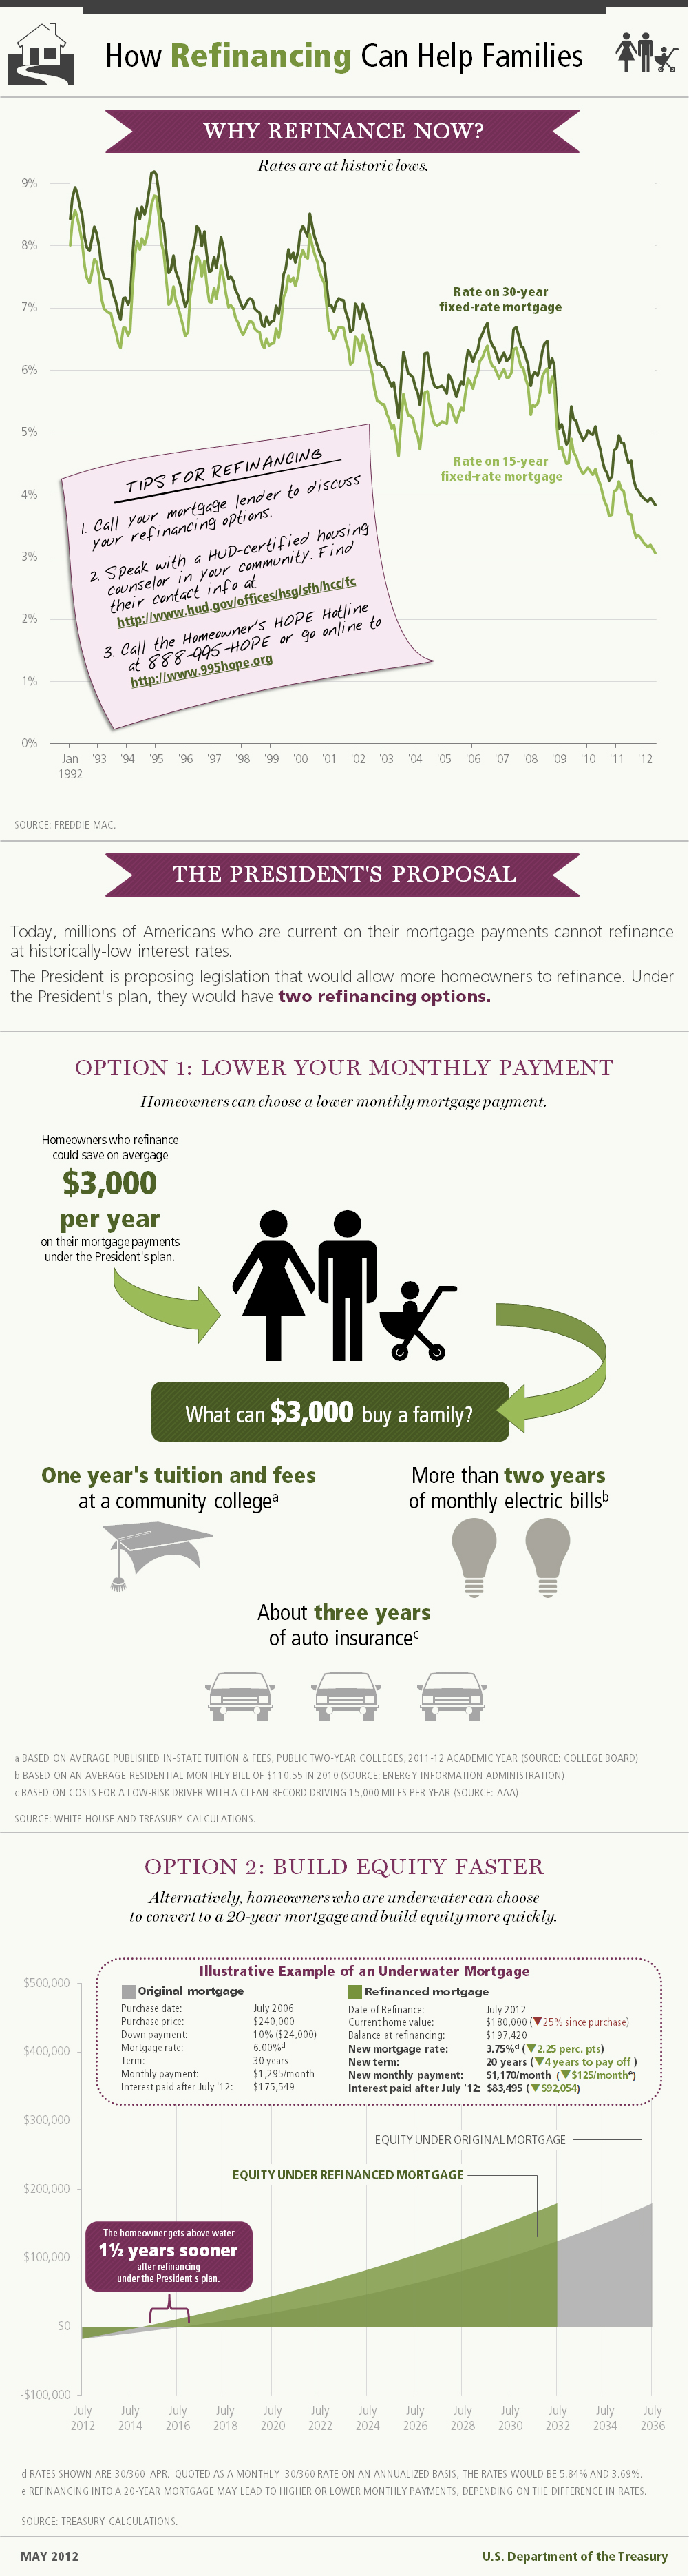 How Refinancing Can Help Families (May 11, 2012)